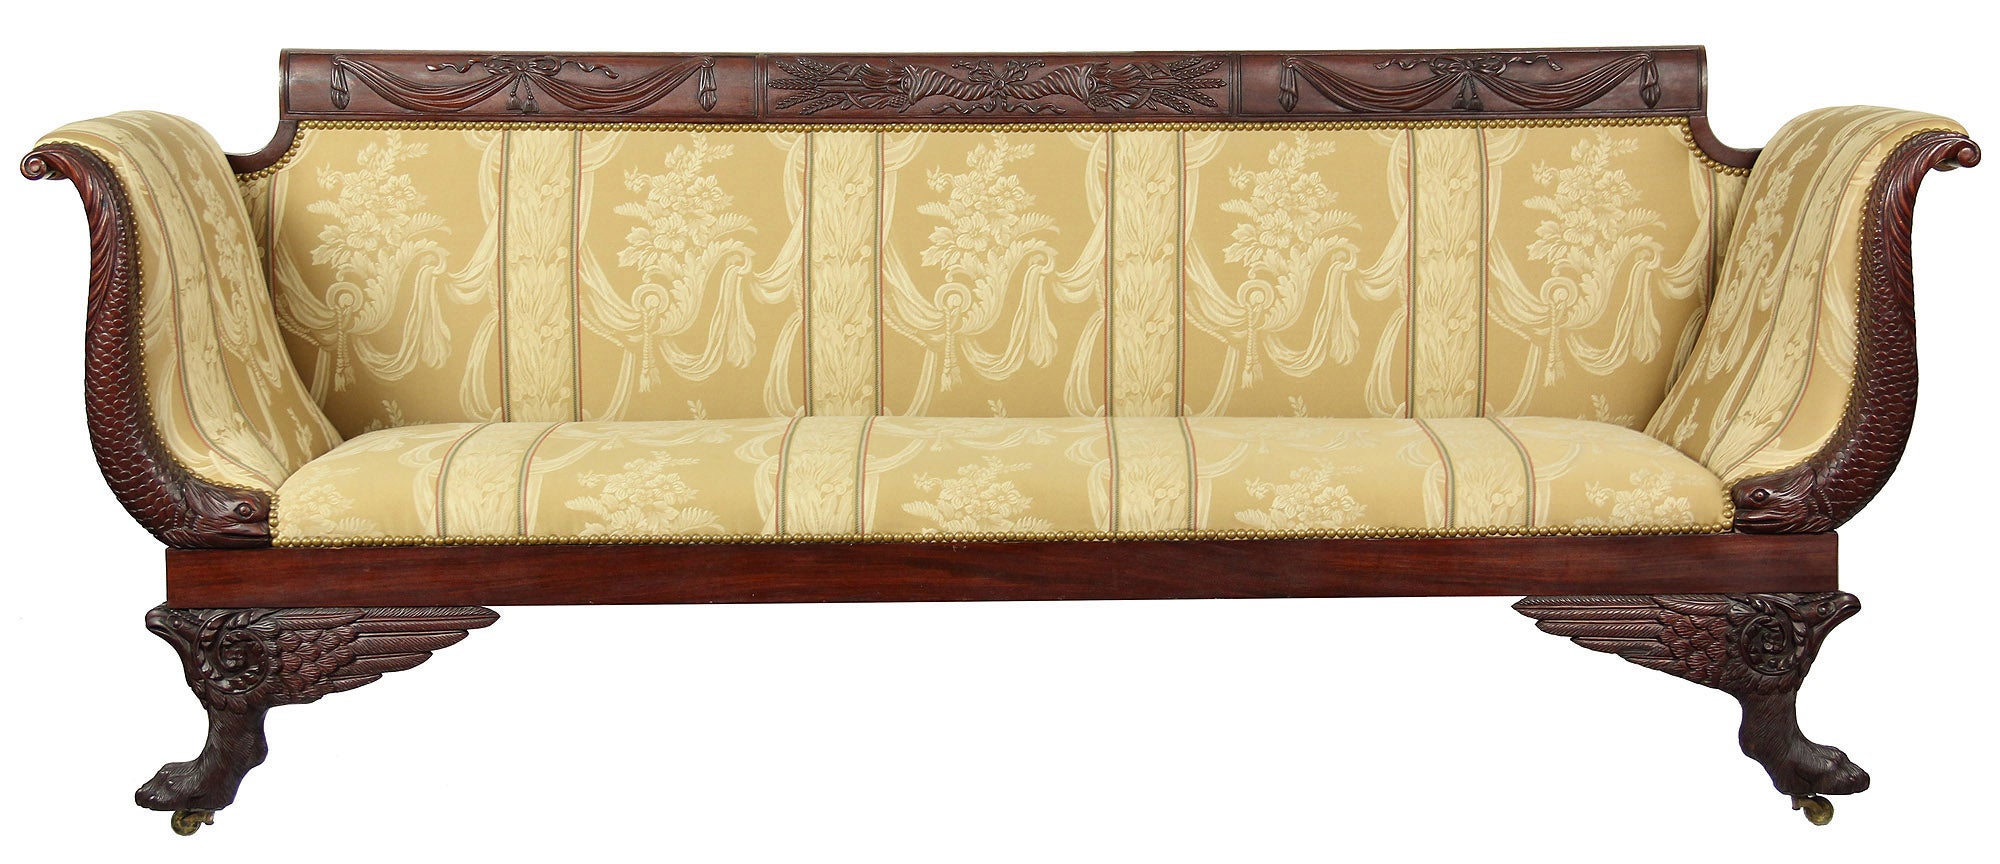 Carved Mahogany Classical Sofa with Dolphins, circa 1810, New York For Sale